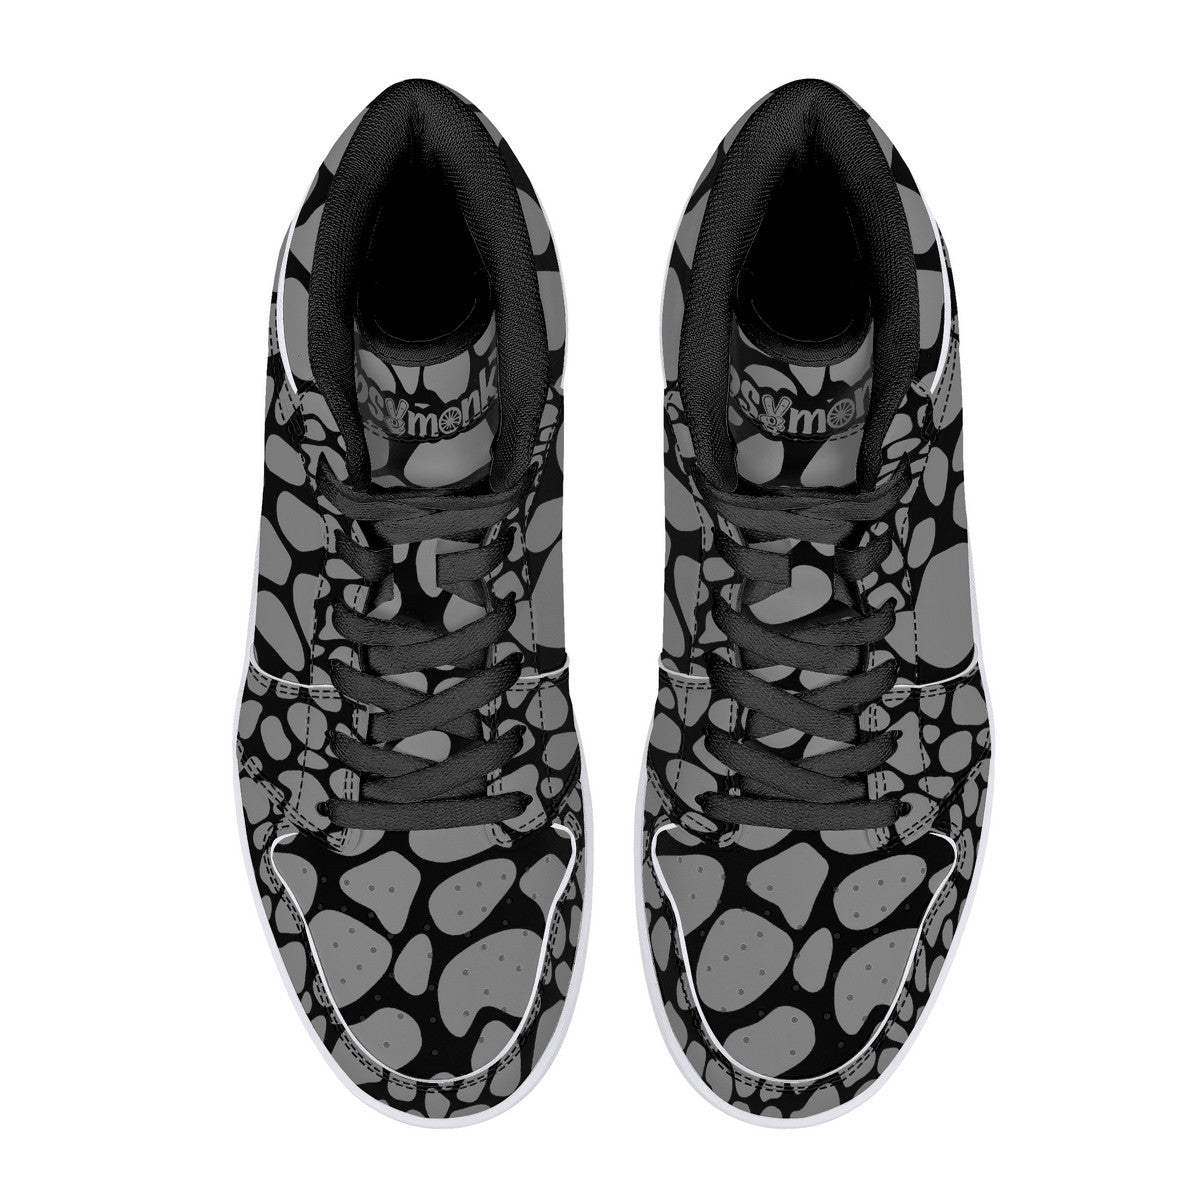 "Mono Giraffe" High-Top Synthetic Leather Sneakers